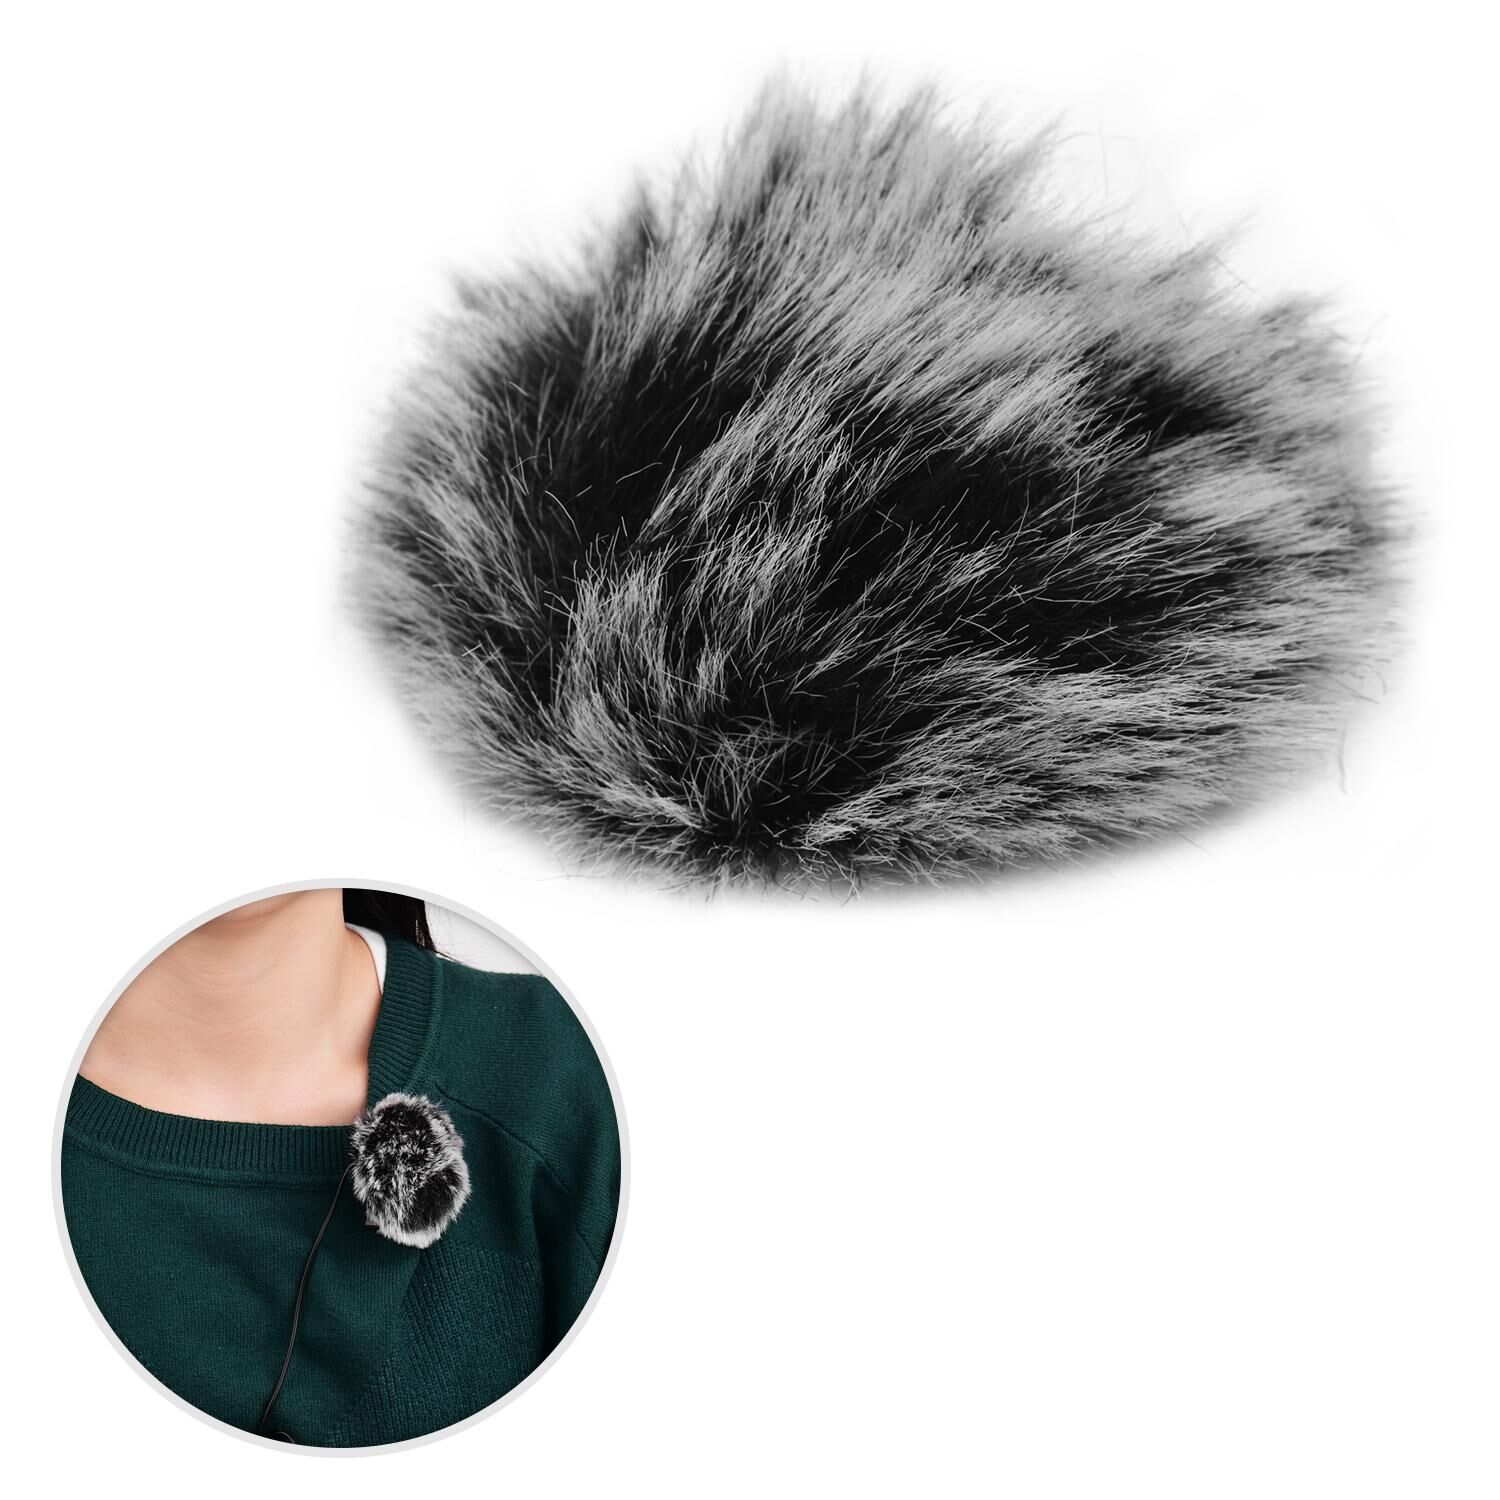 Andoer Clip-on Lavalier Microphone Windscreen Furry Windshield Mic Muff Compatible with Boya M1 and Other Most Lapel Microphones